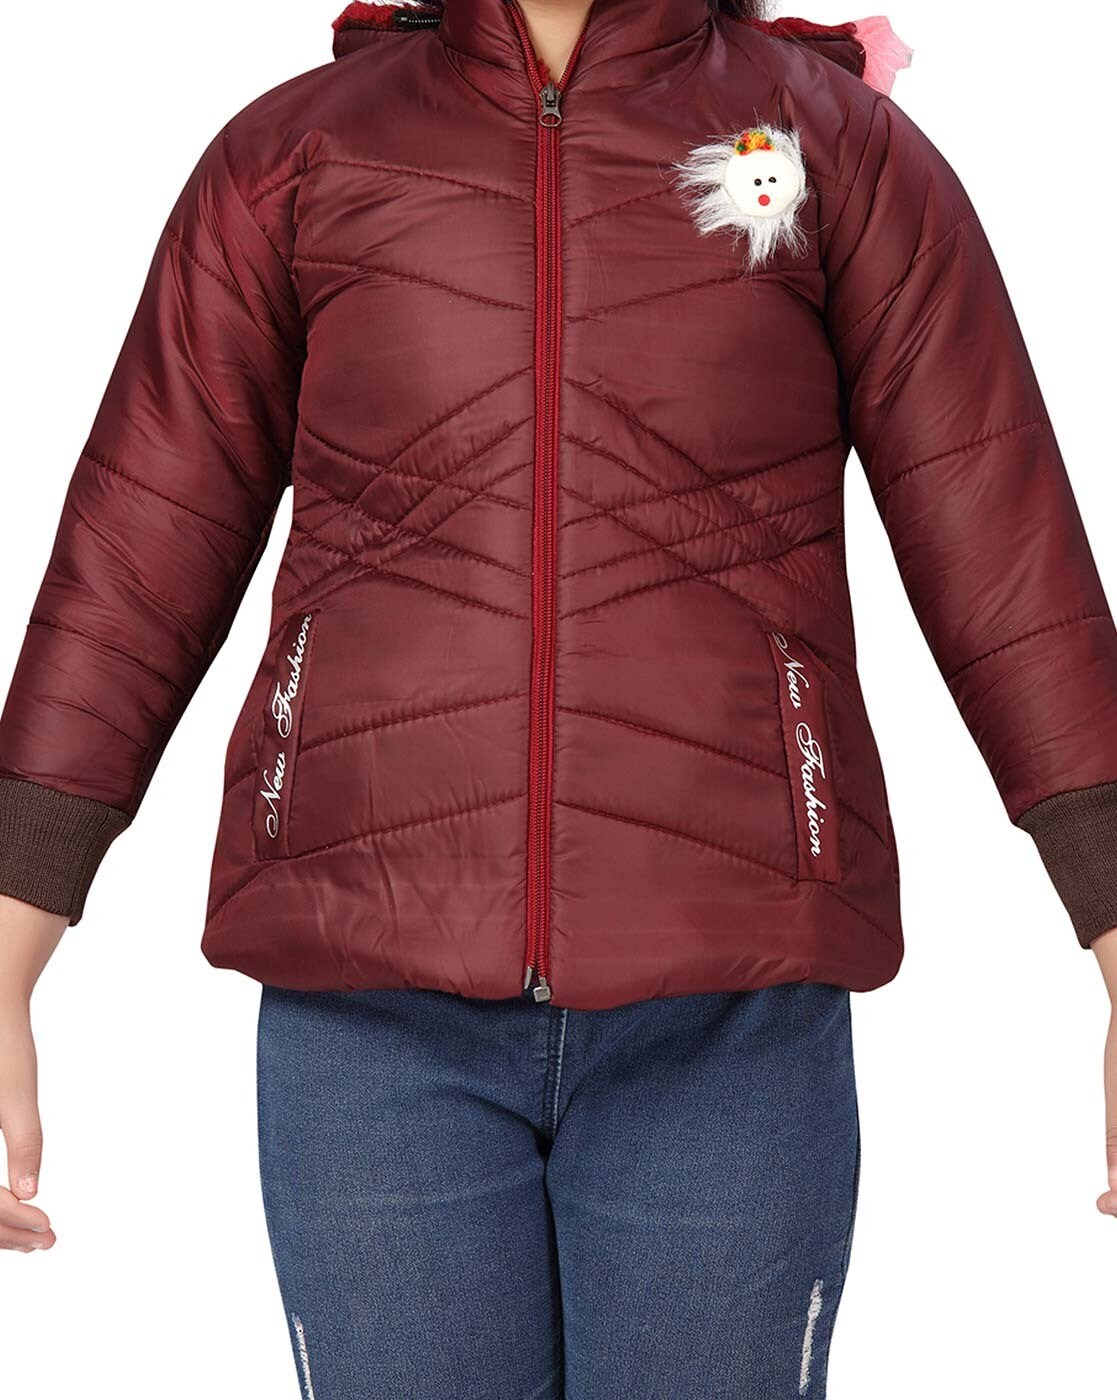 The 2022 Winter Fashion Trend New Children's Down Jacket Girls' Waterproof  & Warm Thick Long Coat Children's Cold-proof Clothing | Fruugo NO